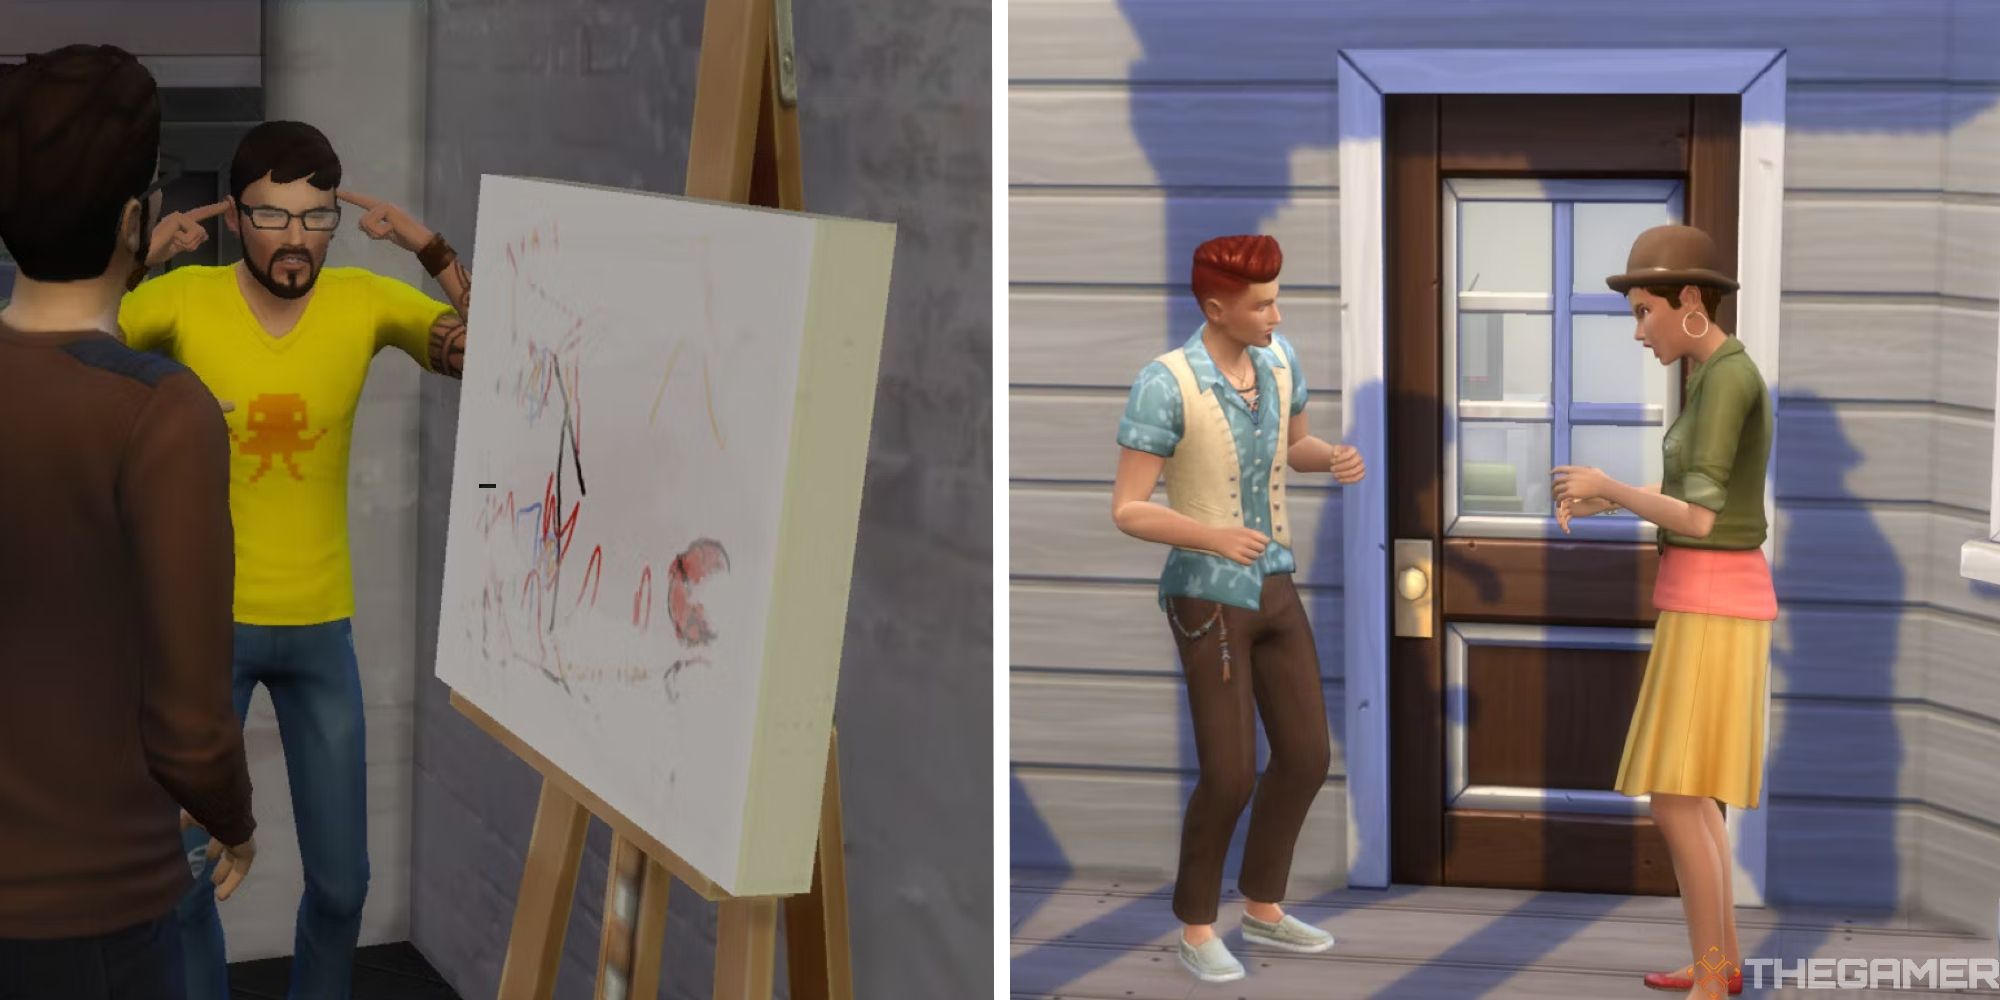 sims 4 split image showing two couples arguing